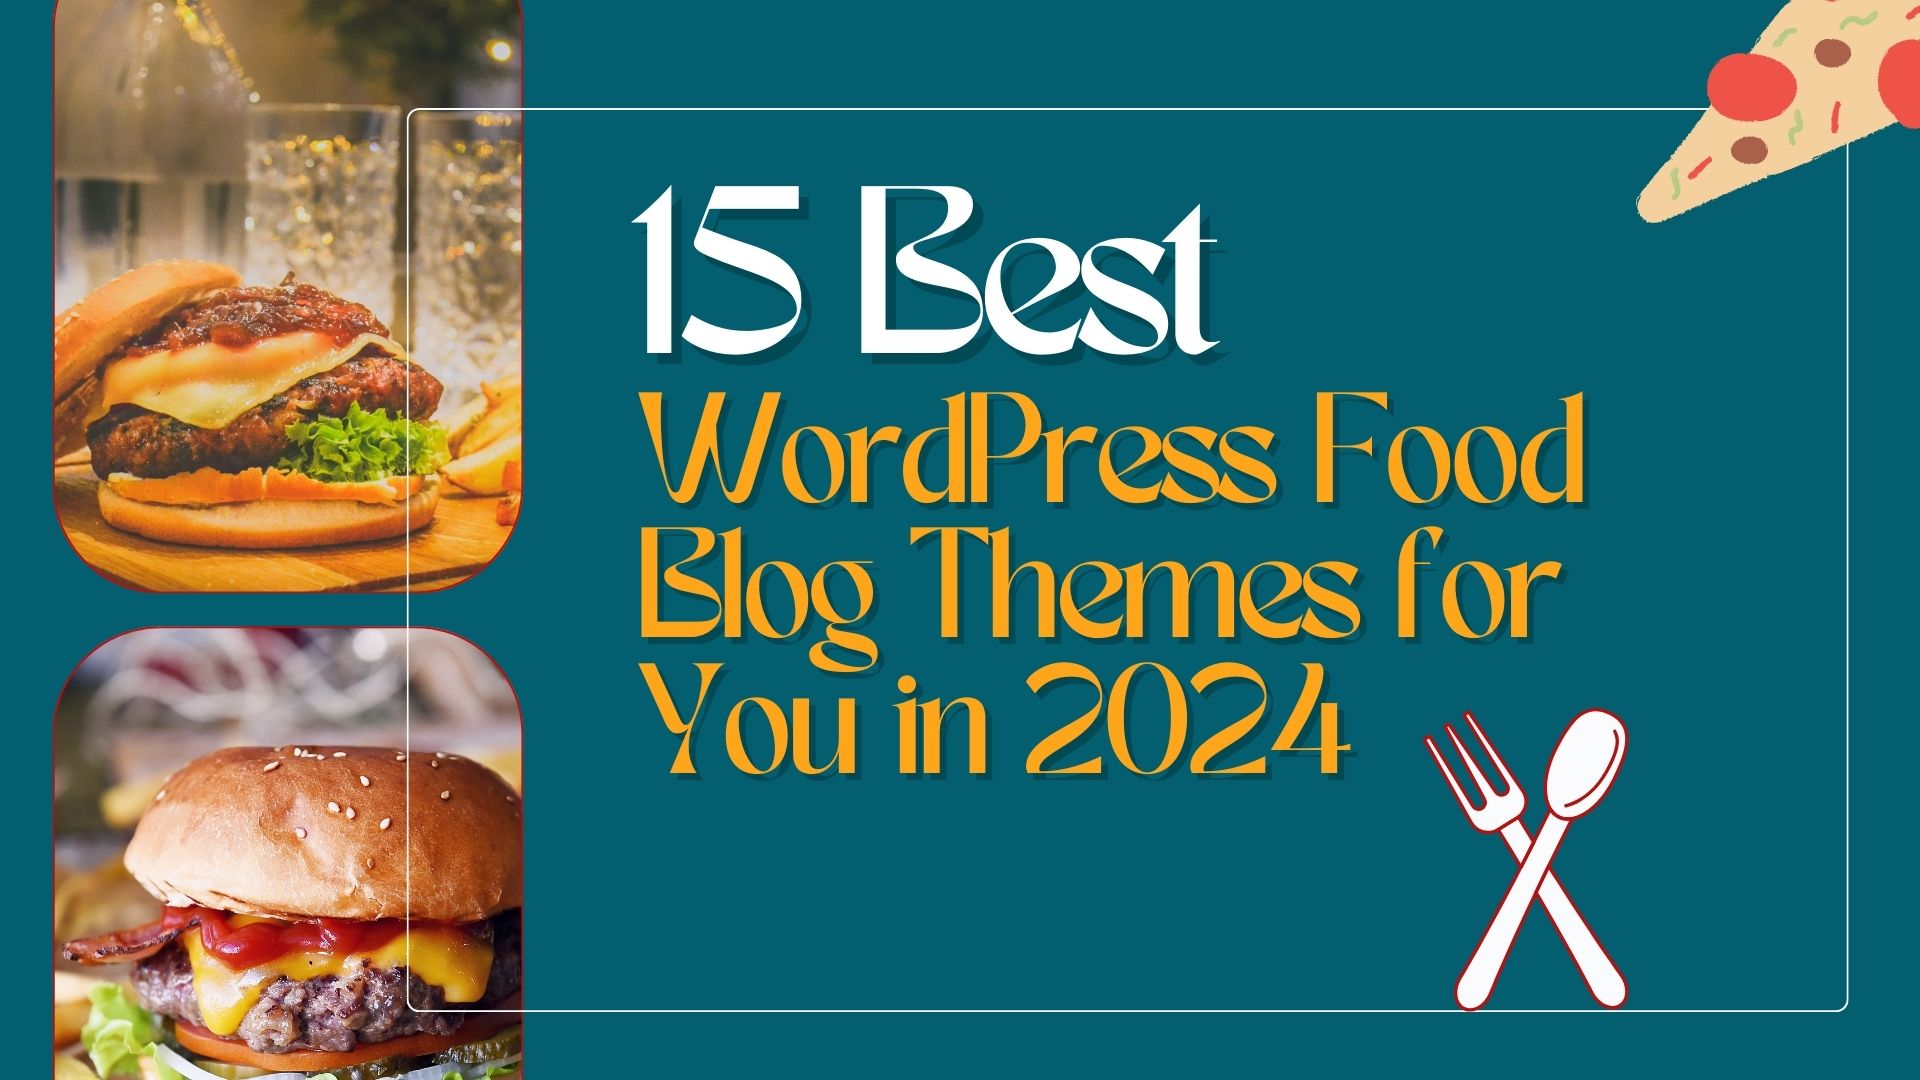 15 Best WordPress Food Blog Themes for You in 2024